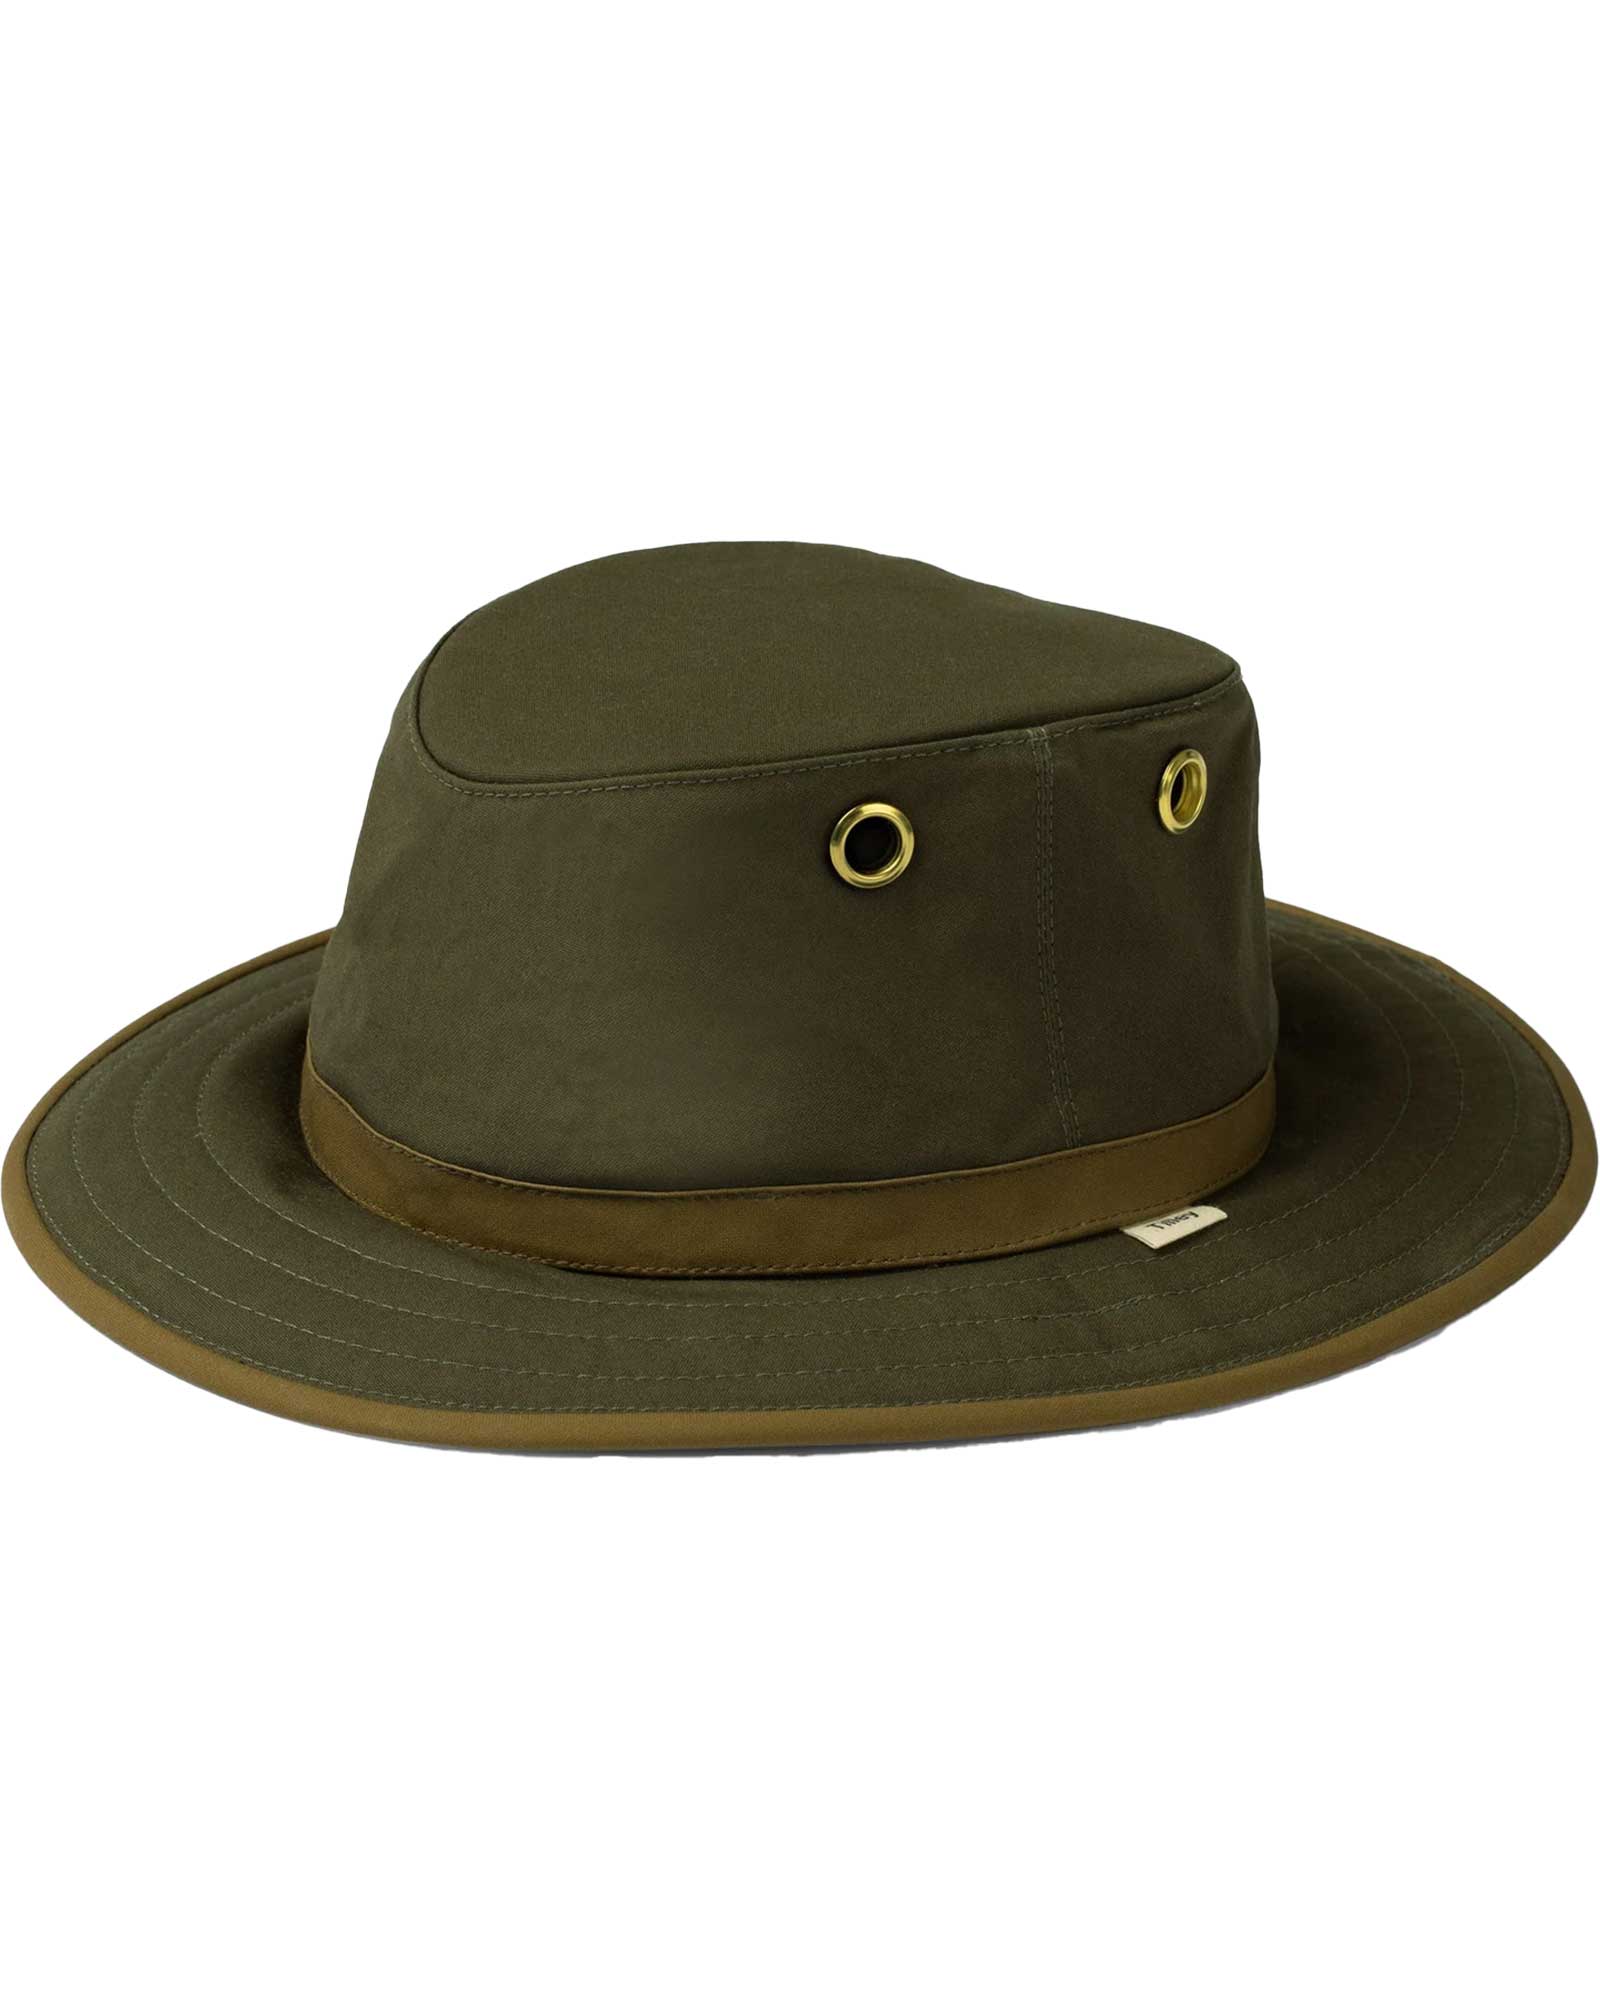 Tilley Outback Waxed Cotton Hat - Green 7 1/2